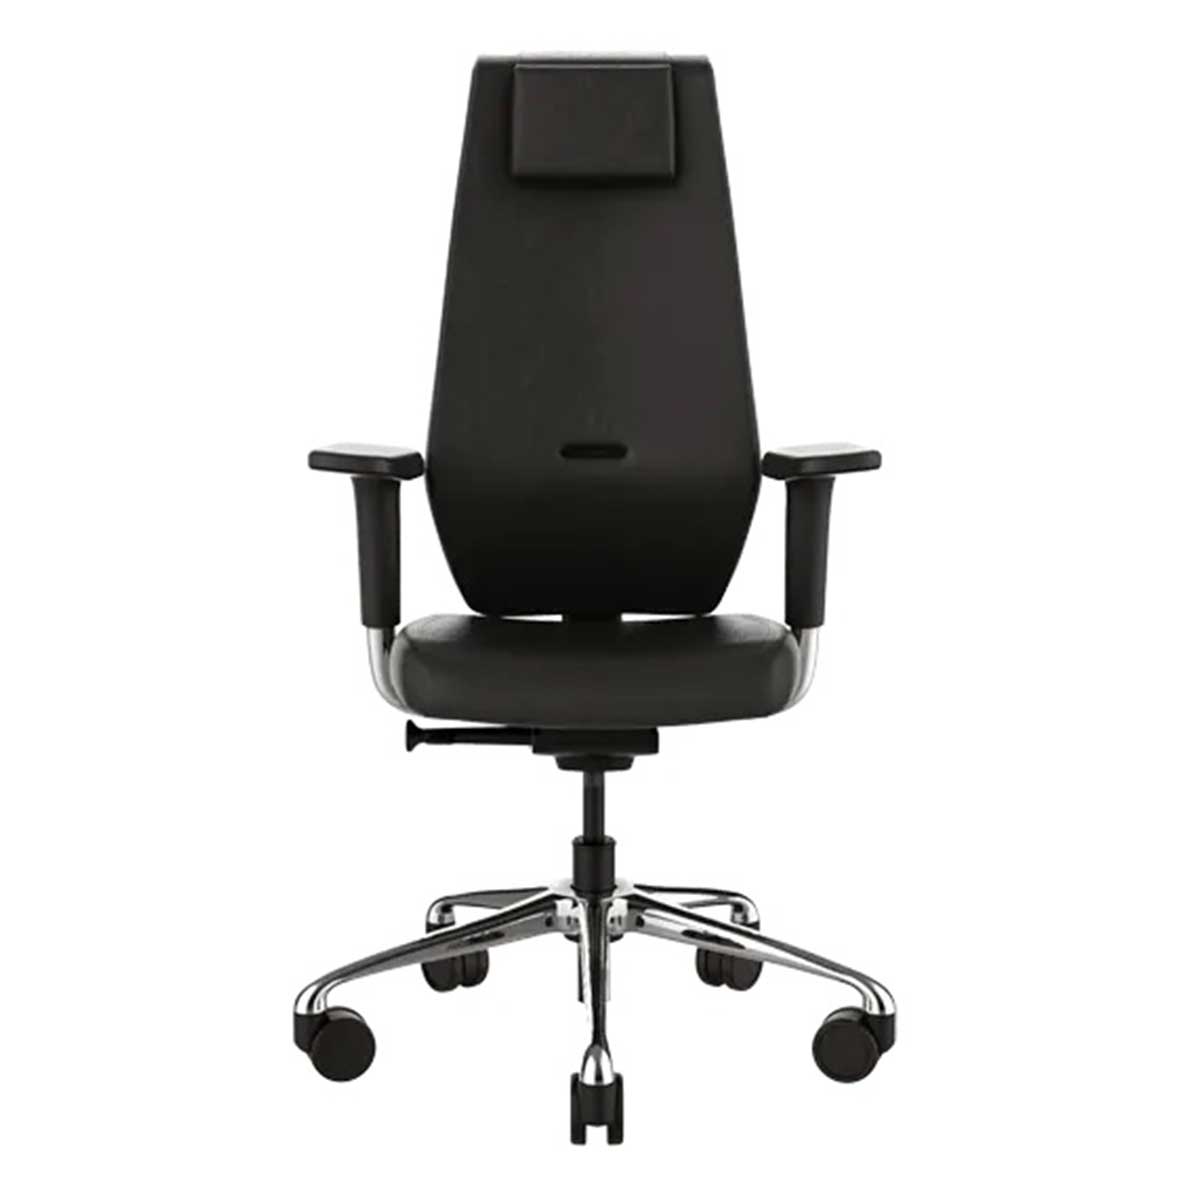 Mesh Executive Chair Manufacturers, Suppliers in Noida Sector 77